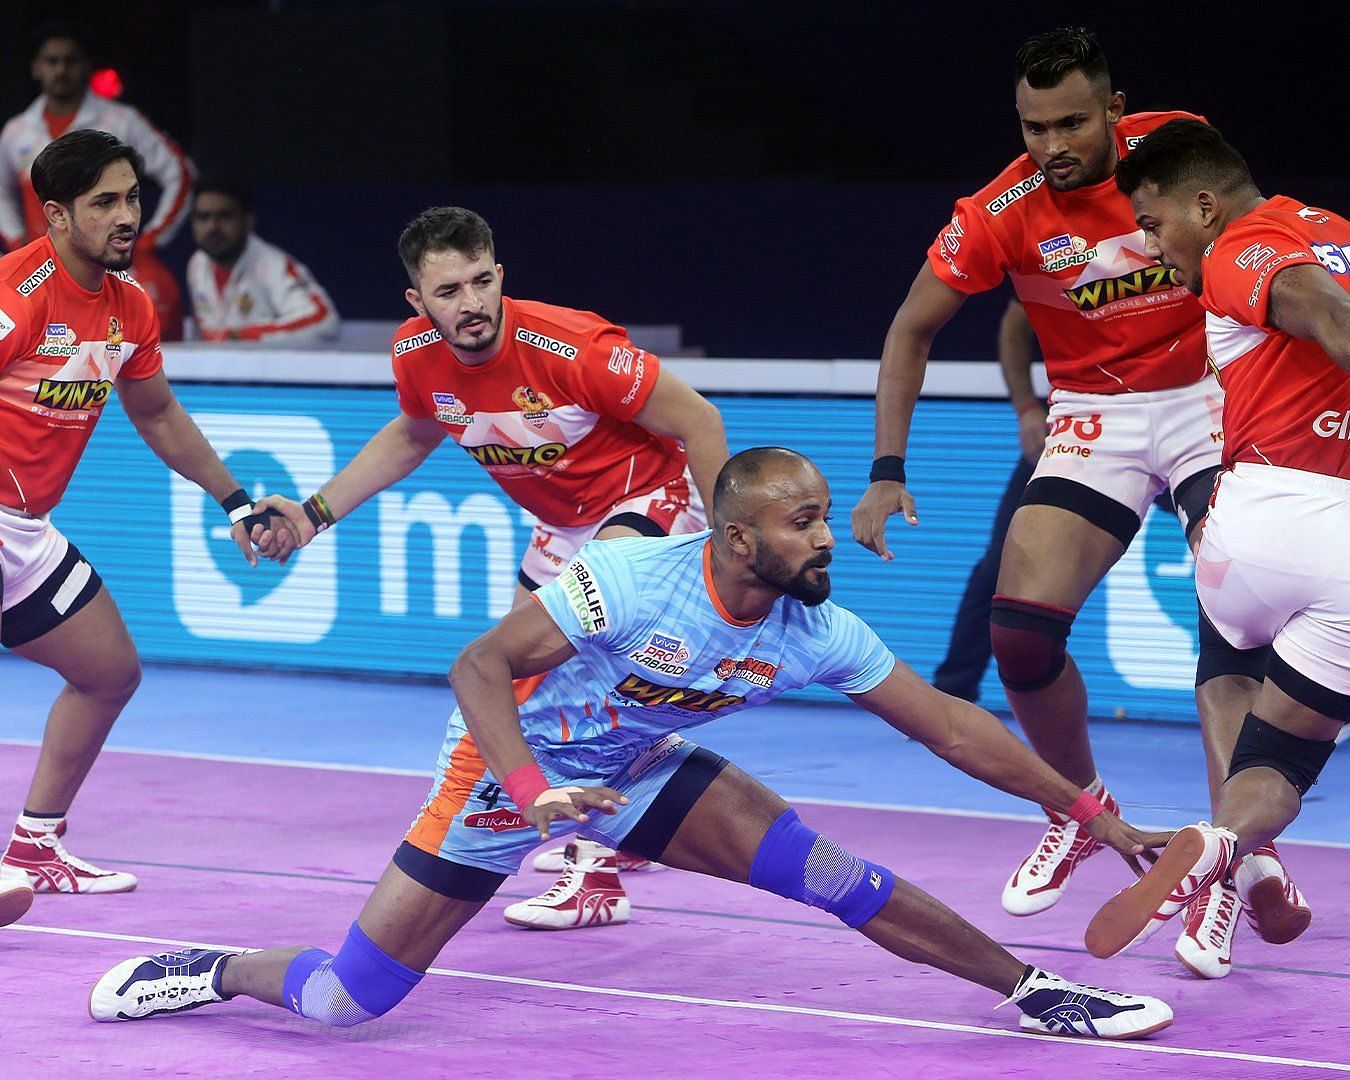 Akash Pikalmunde in action for the Bengal Warriors against the Gujarat Giants in the Pro Kabaddi League - Image Courtesy: Bengal Warriors Twitter